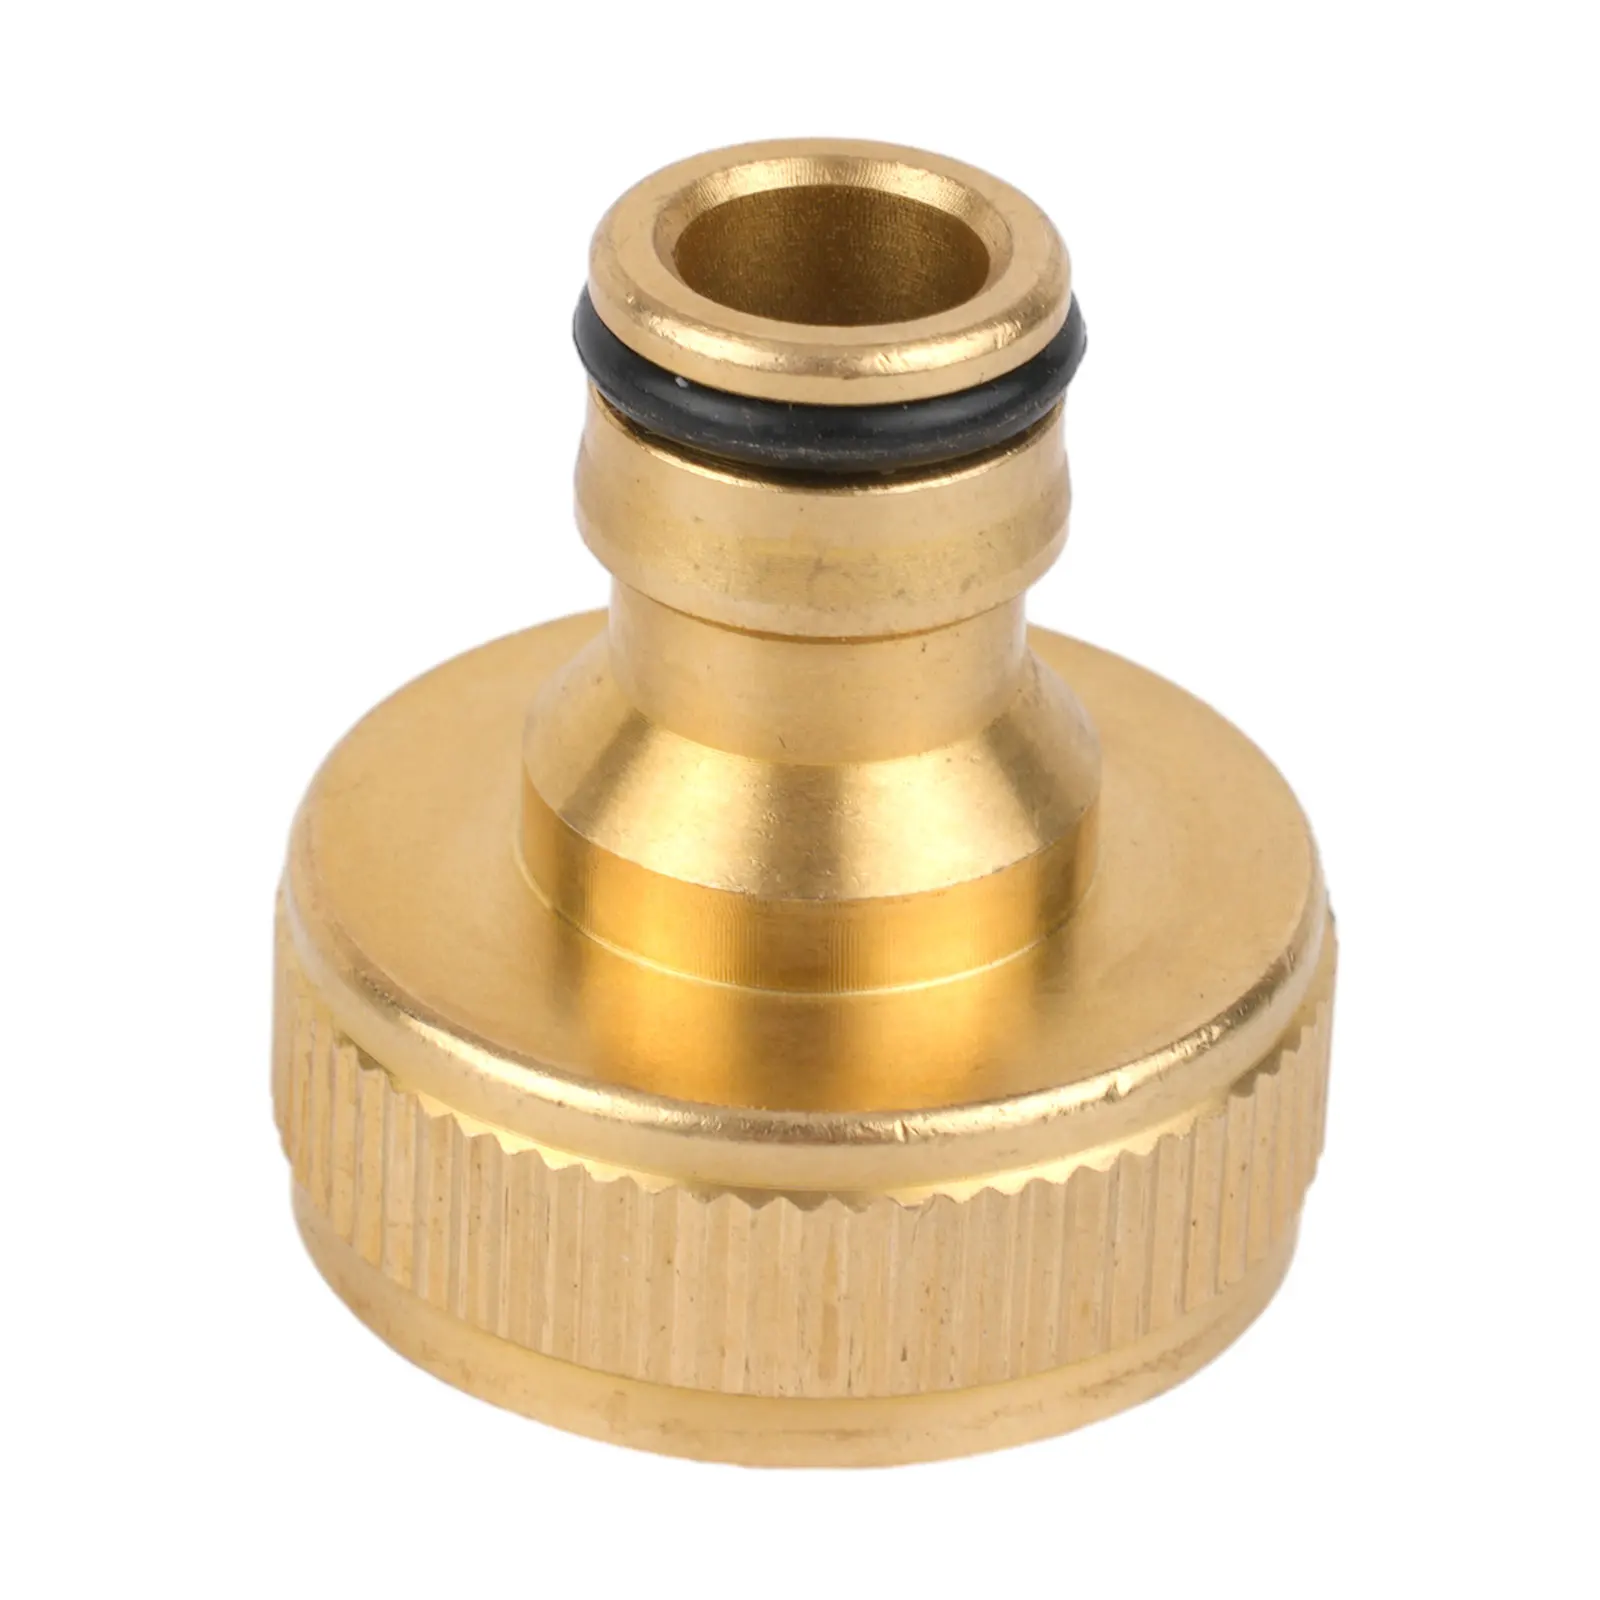 

Fitting Hose Tap Connector Golden Tap Faucet Water Pipe Connector 1inch BSPF 36*31mm Brass+Rubber High Quality